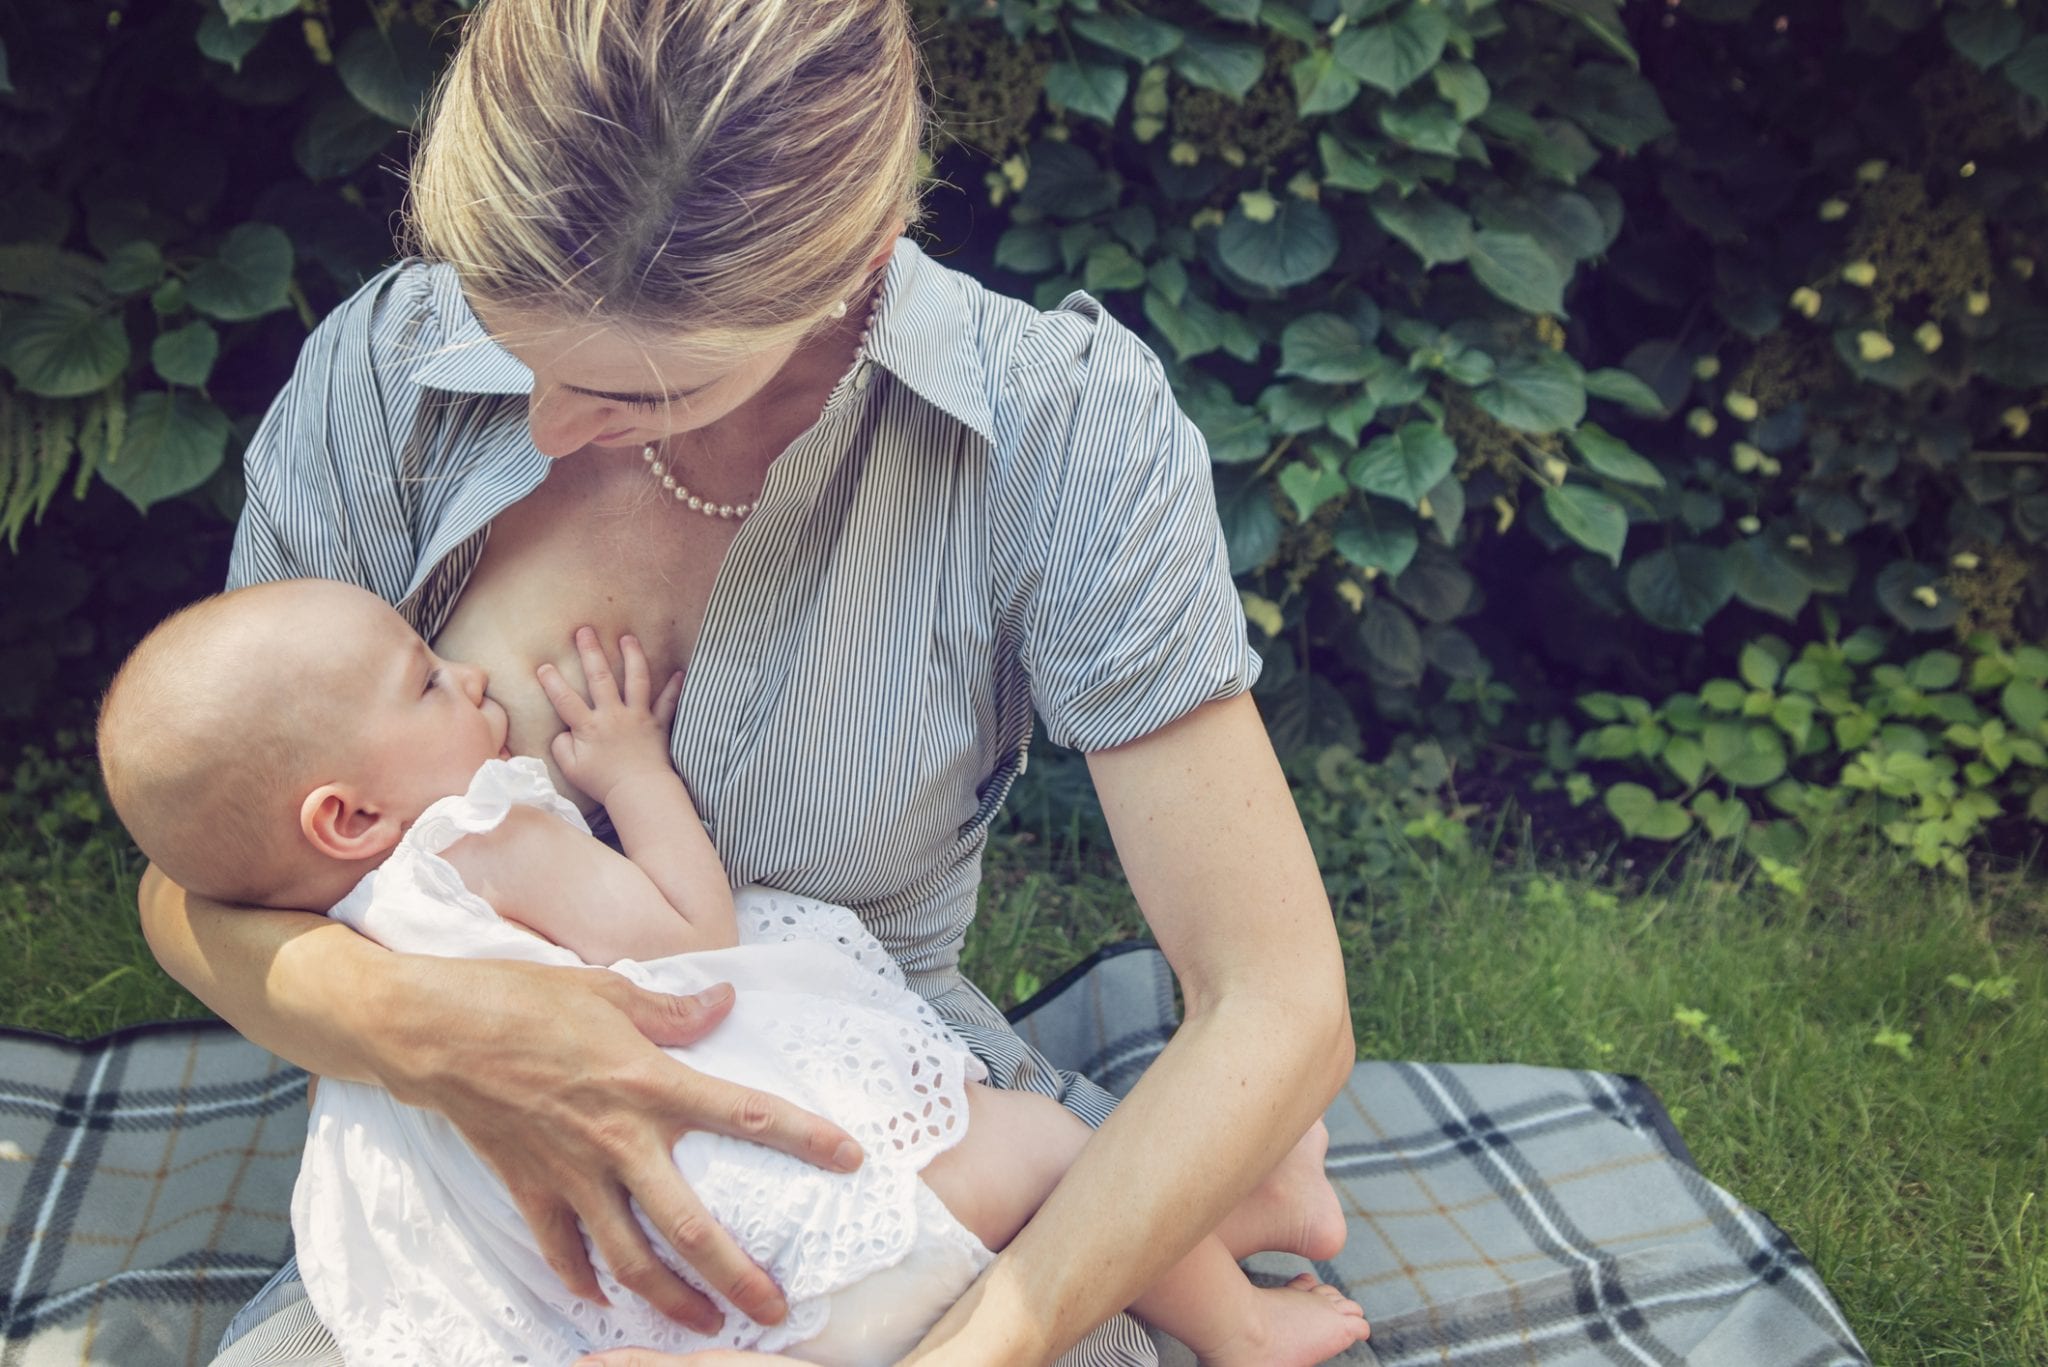 Can Breastfeeding Prevent Breast Cancer?